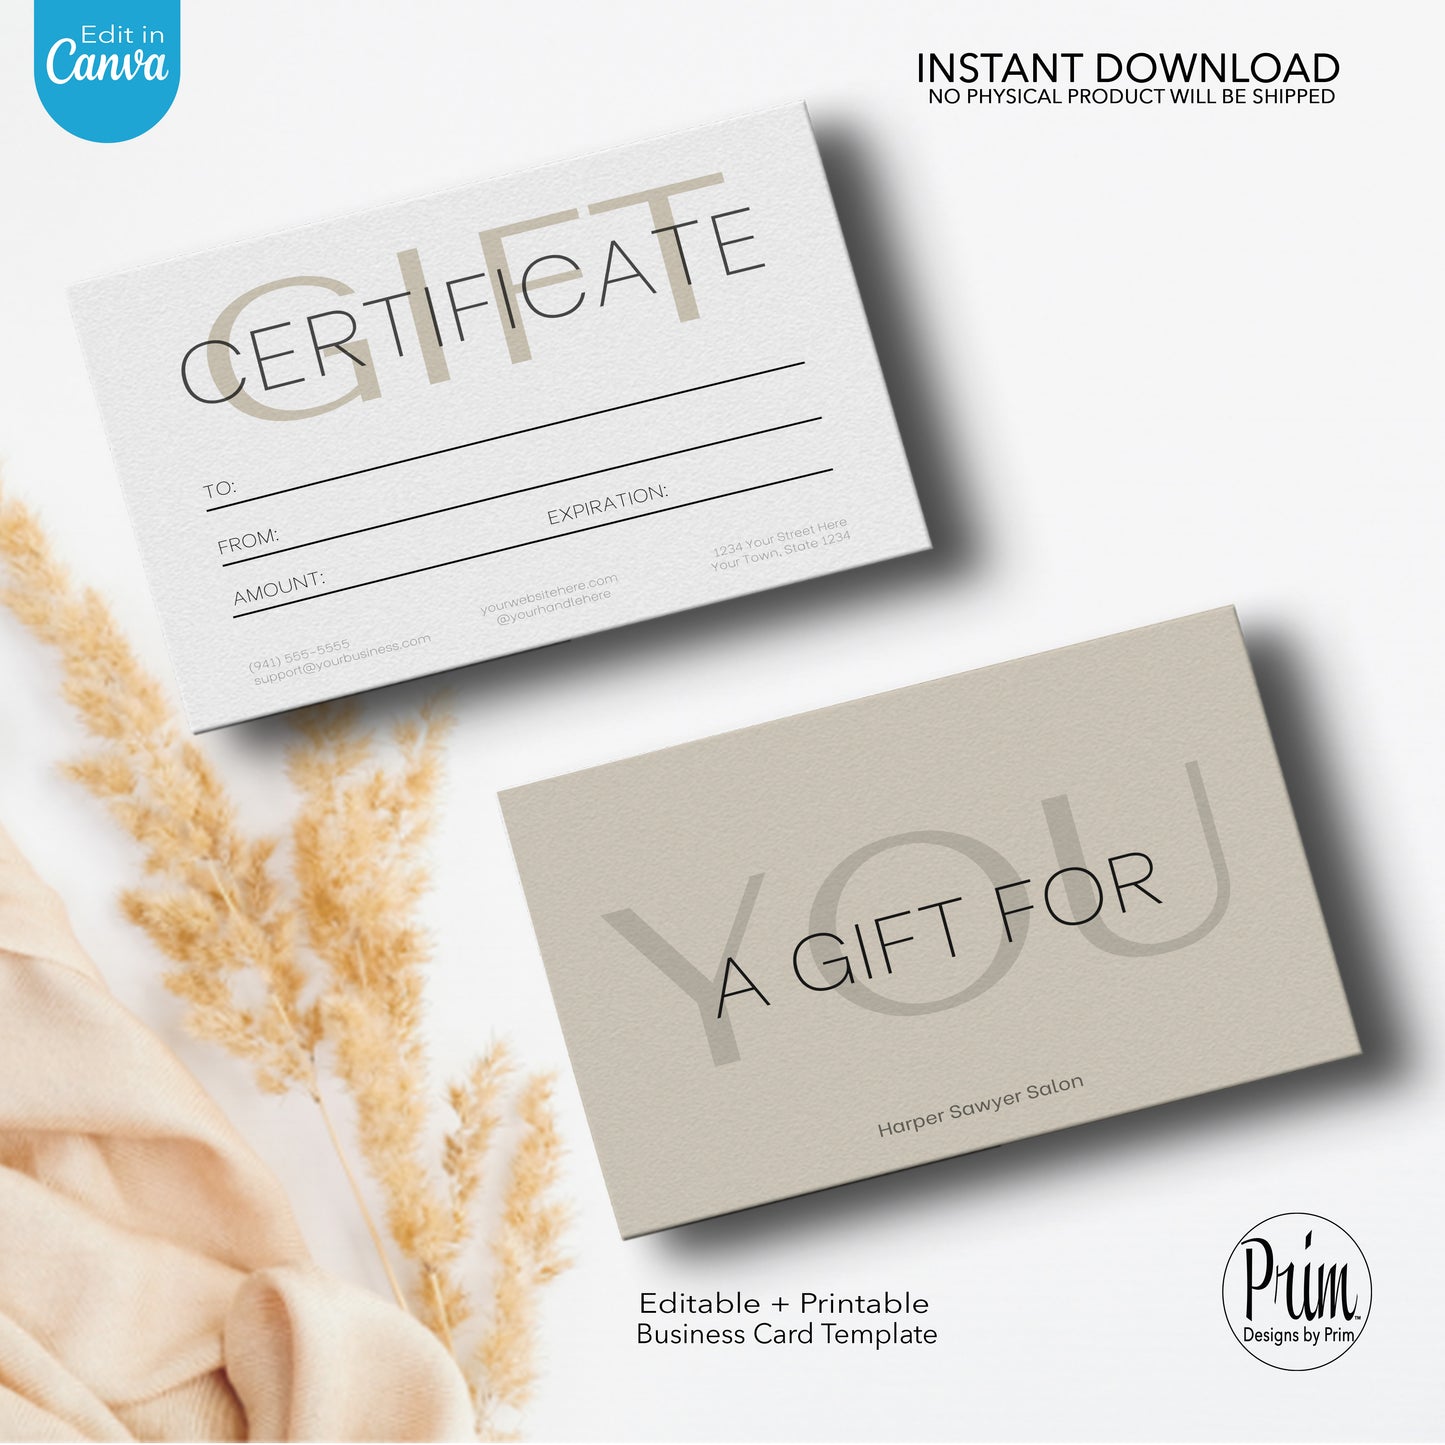 Designs by Prim Designs by Prim Simply Modern Gift Certificate Template | Editable Gift Card | Health Beauty Hair Business Template | Design Studio | Realtor Card Template